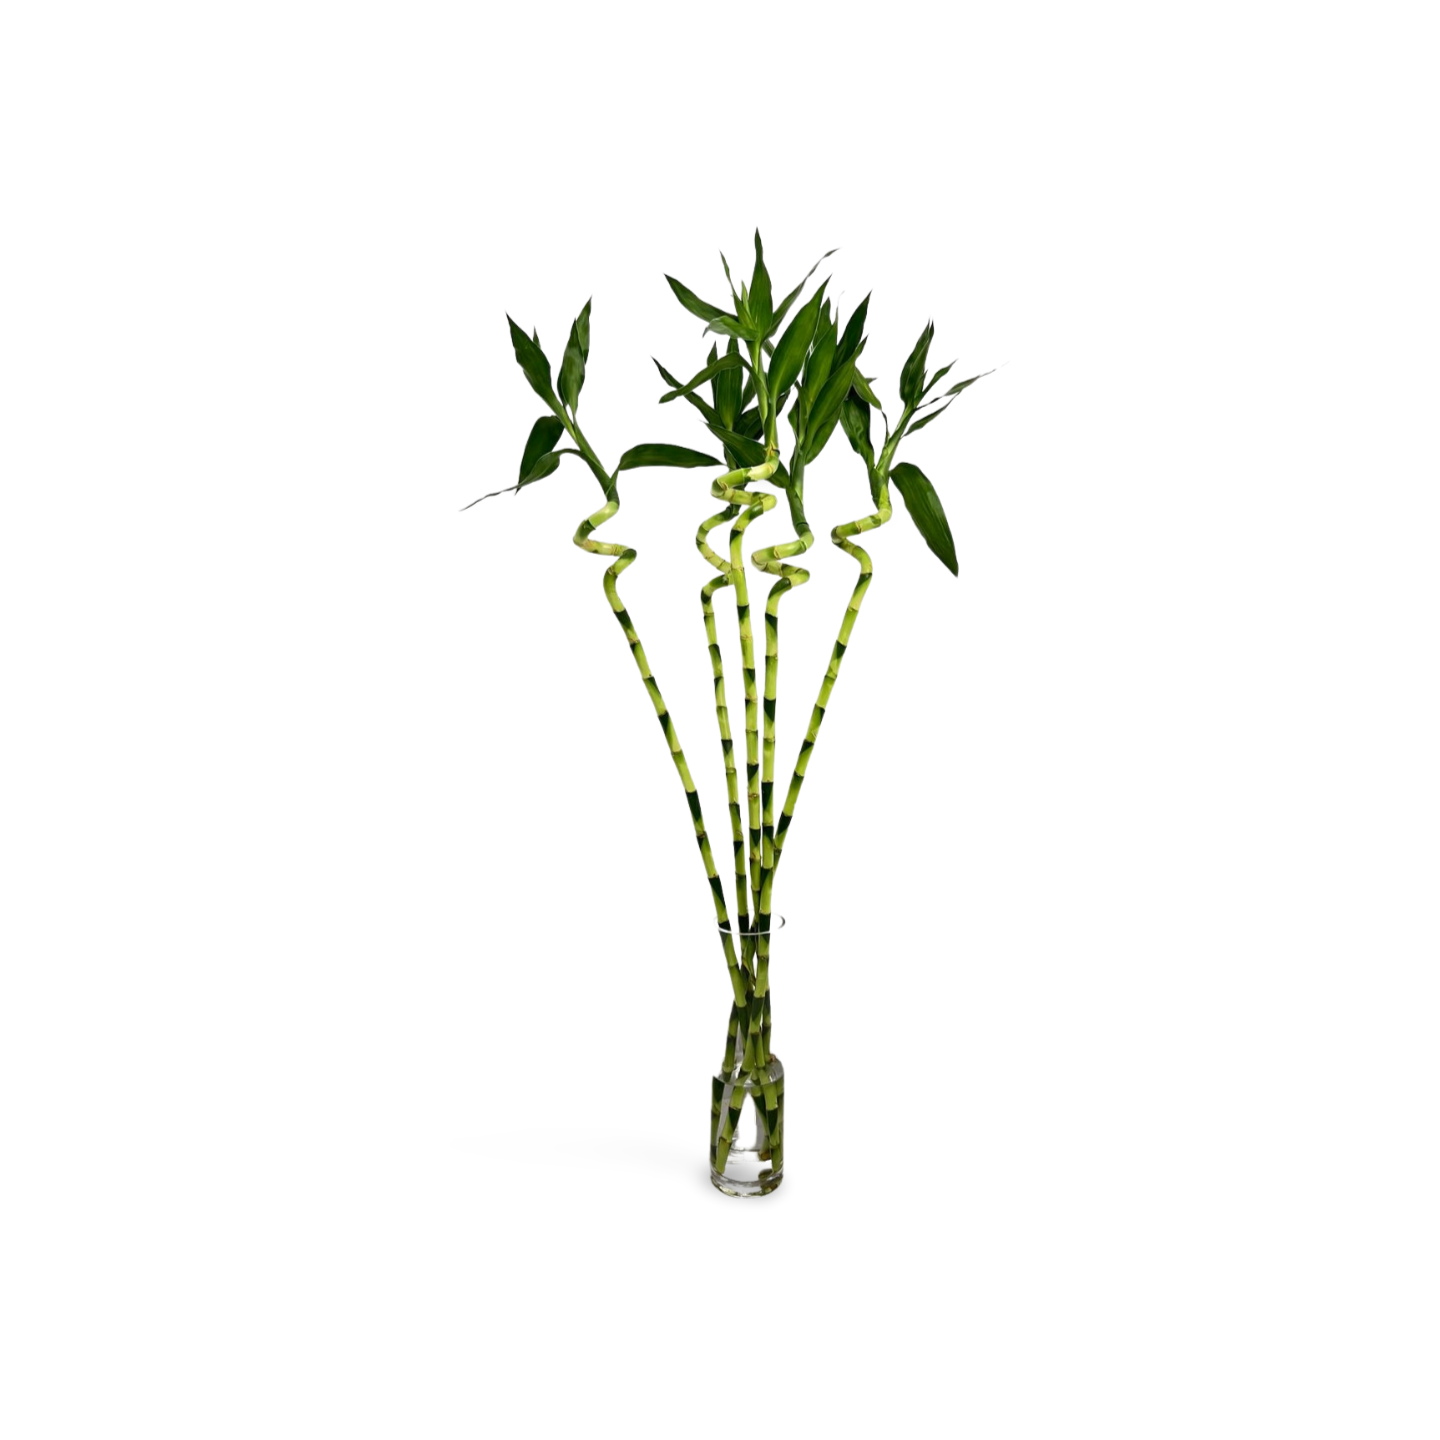 Spiral Lucky Bamboo 1m (Five Bamboo in Vase)